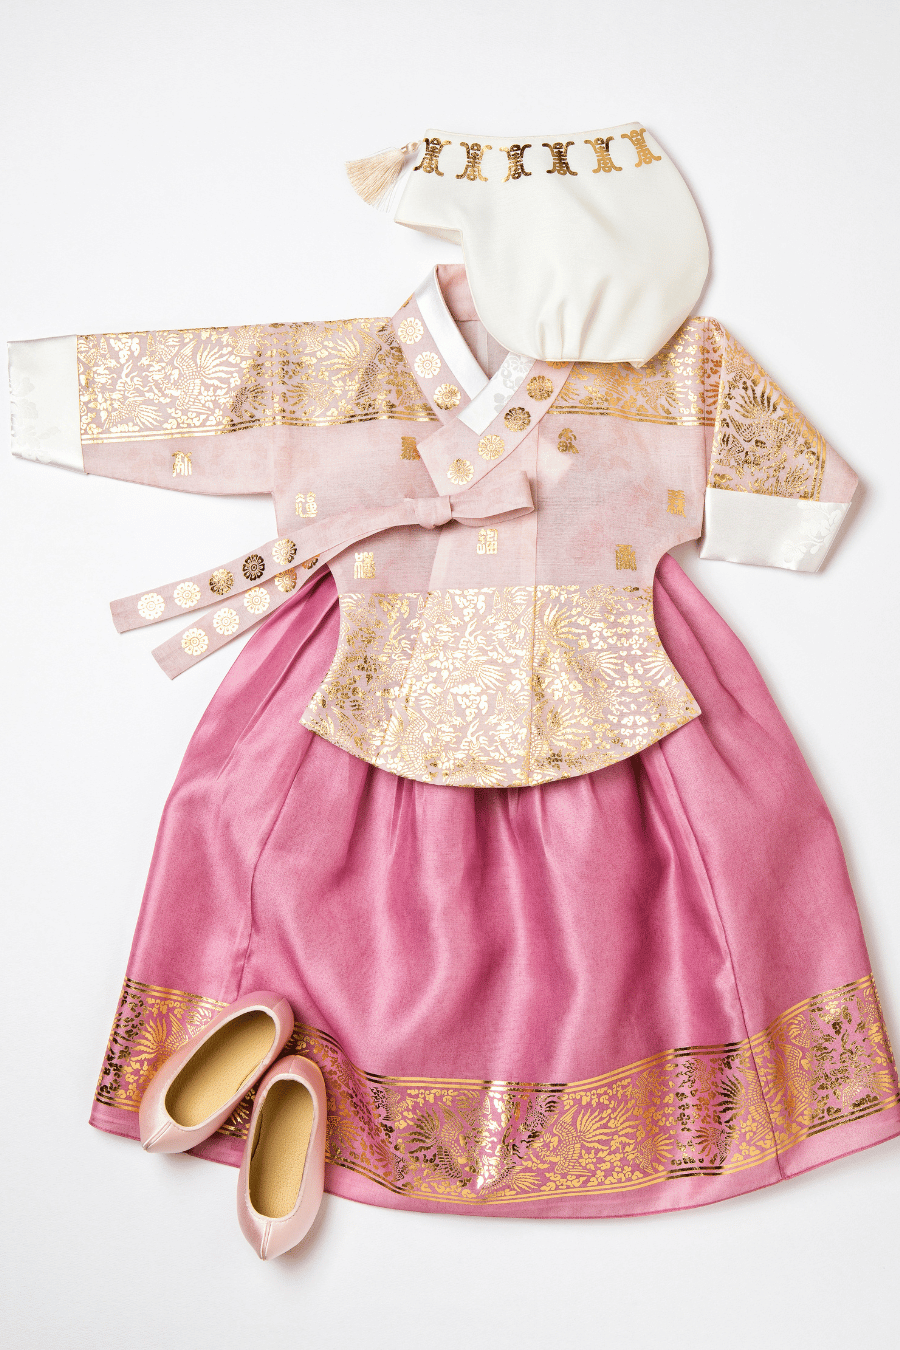 Baby Girl's Dohl Hanbok #25 (luxe line)